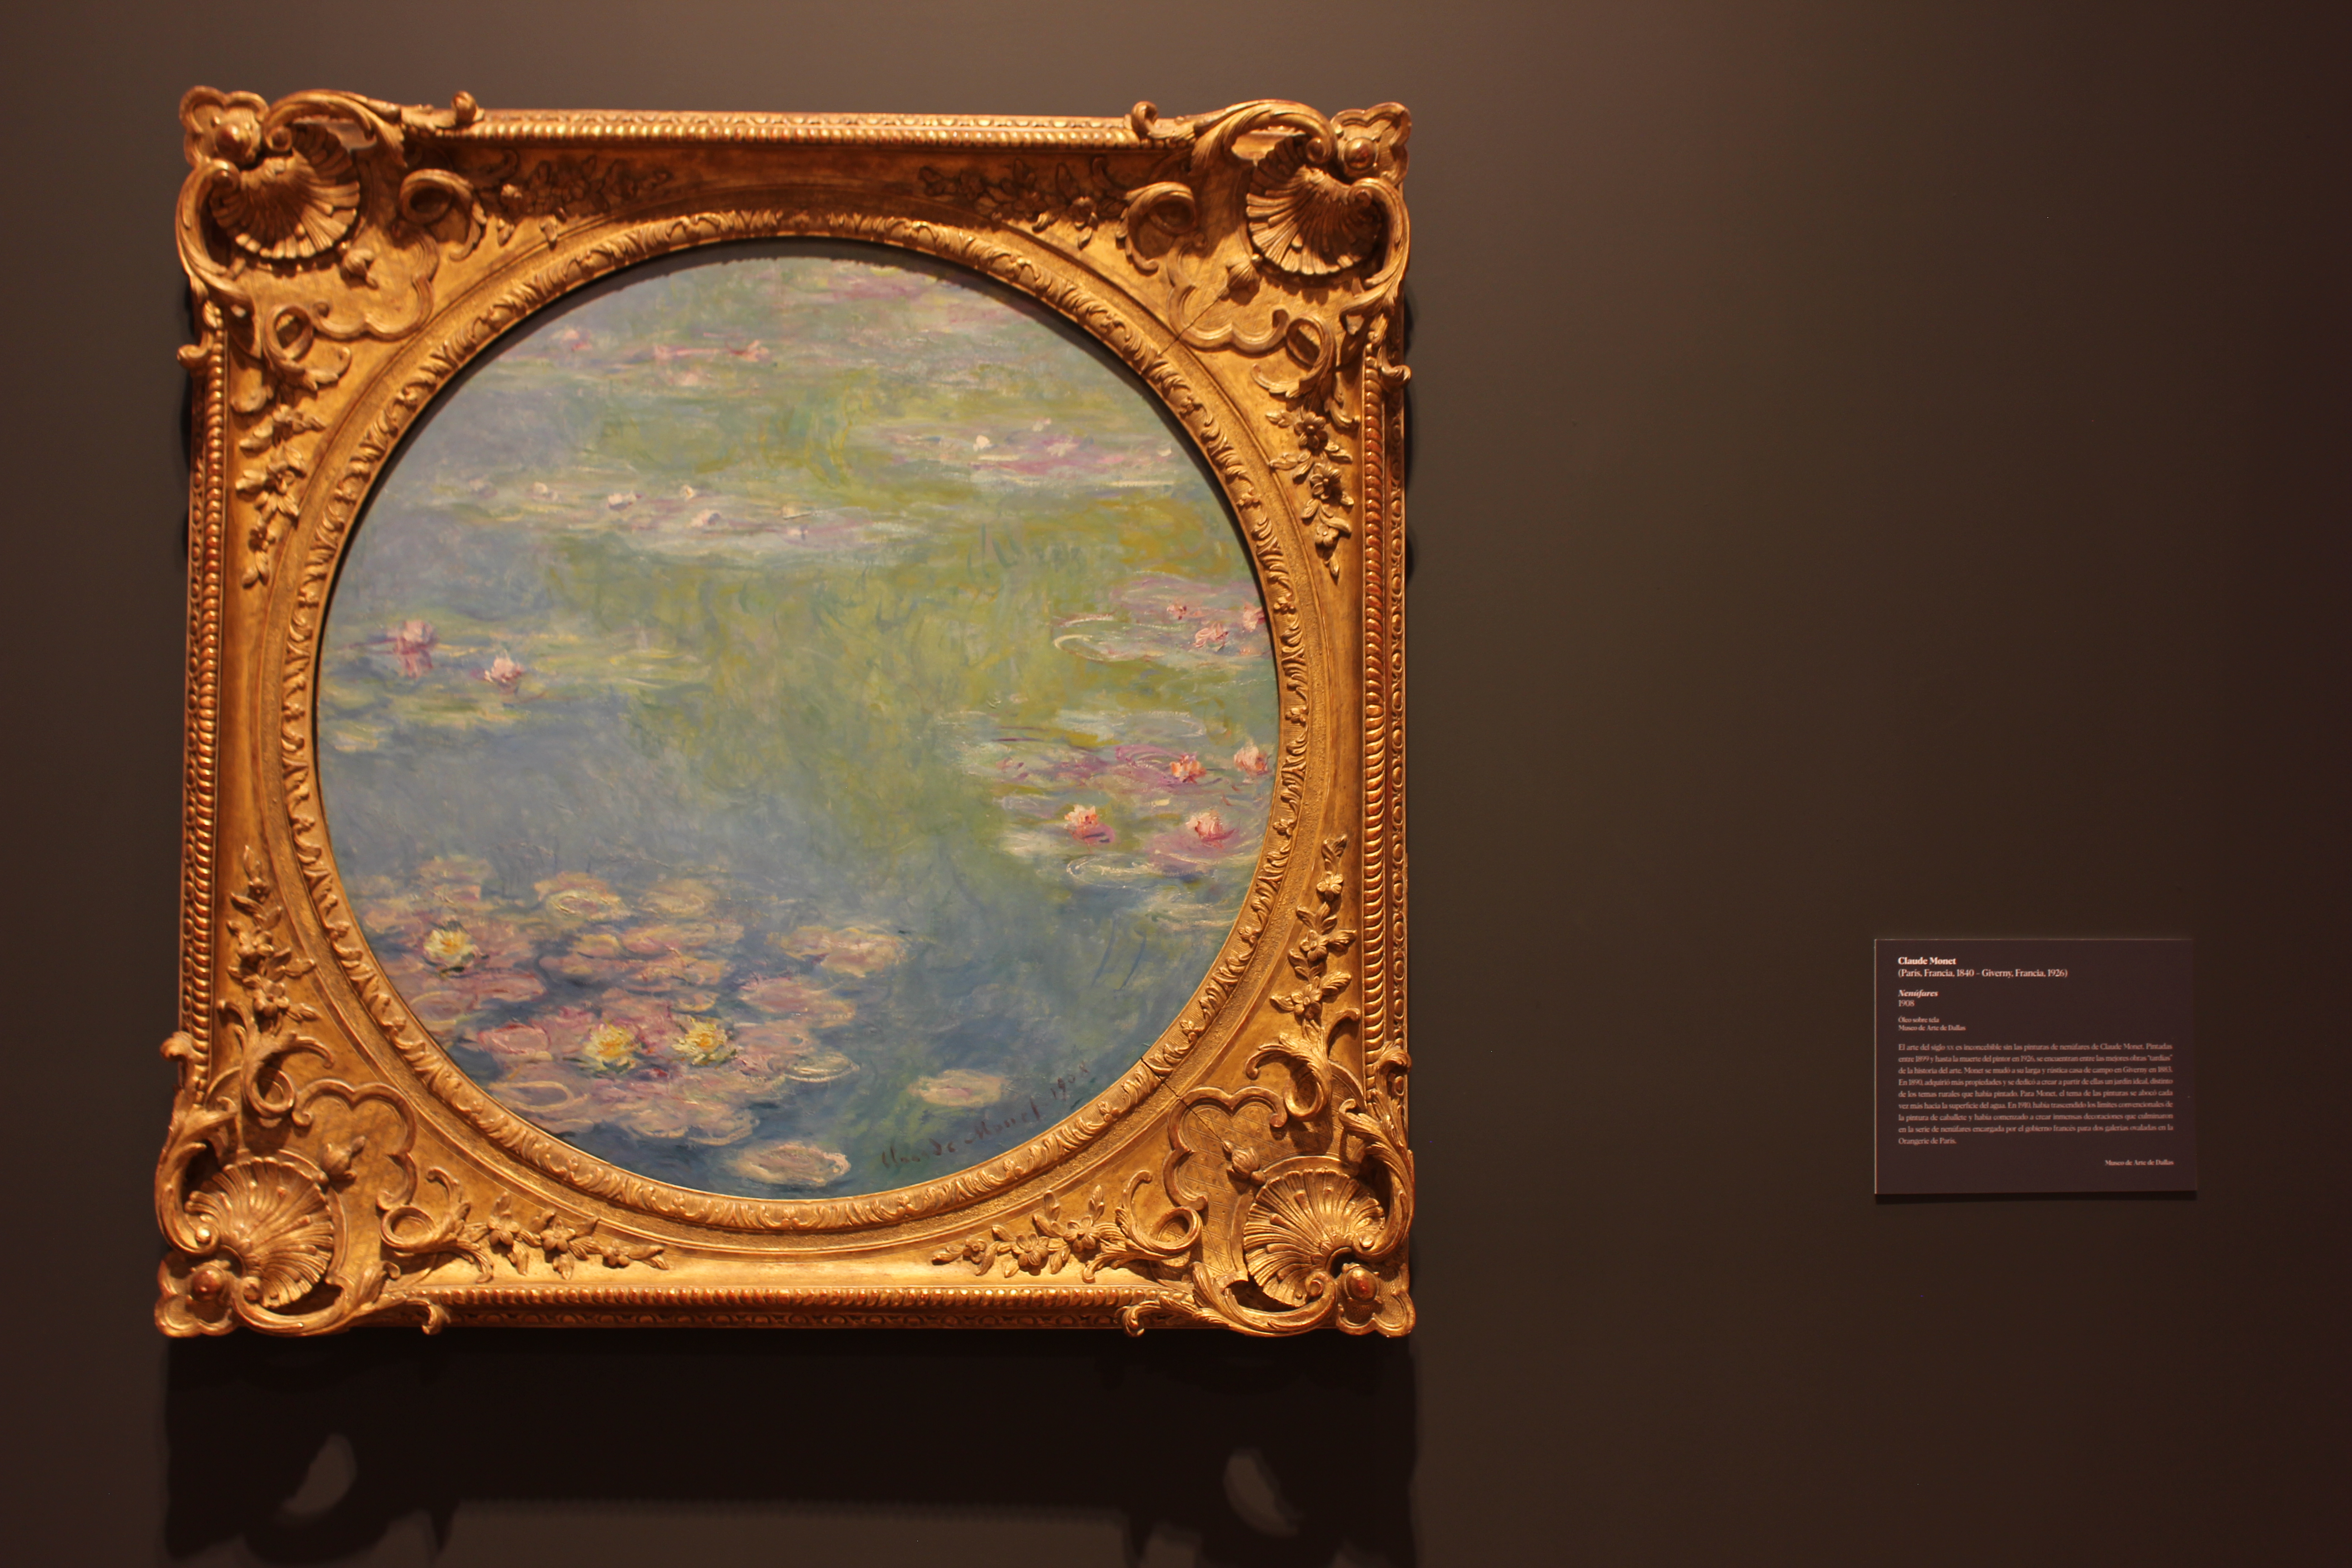 Monet's exhibition at the MUNAL